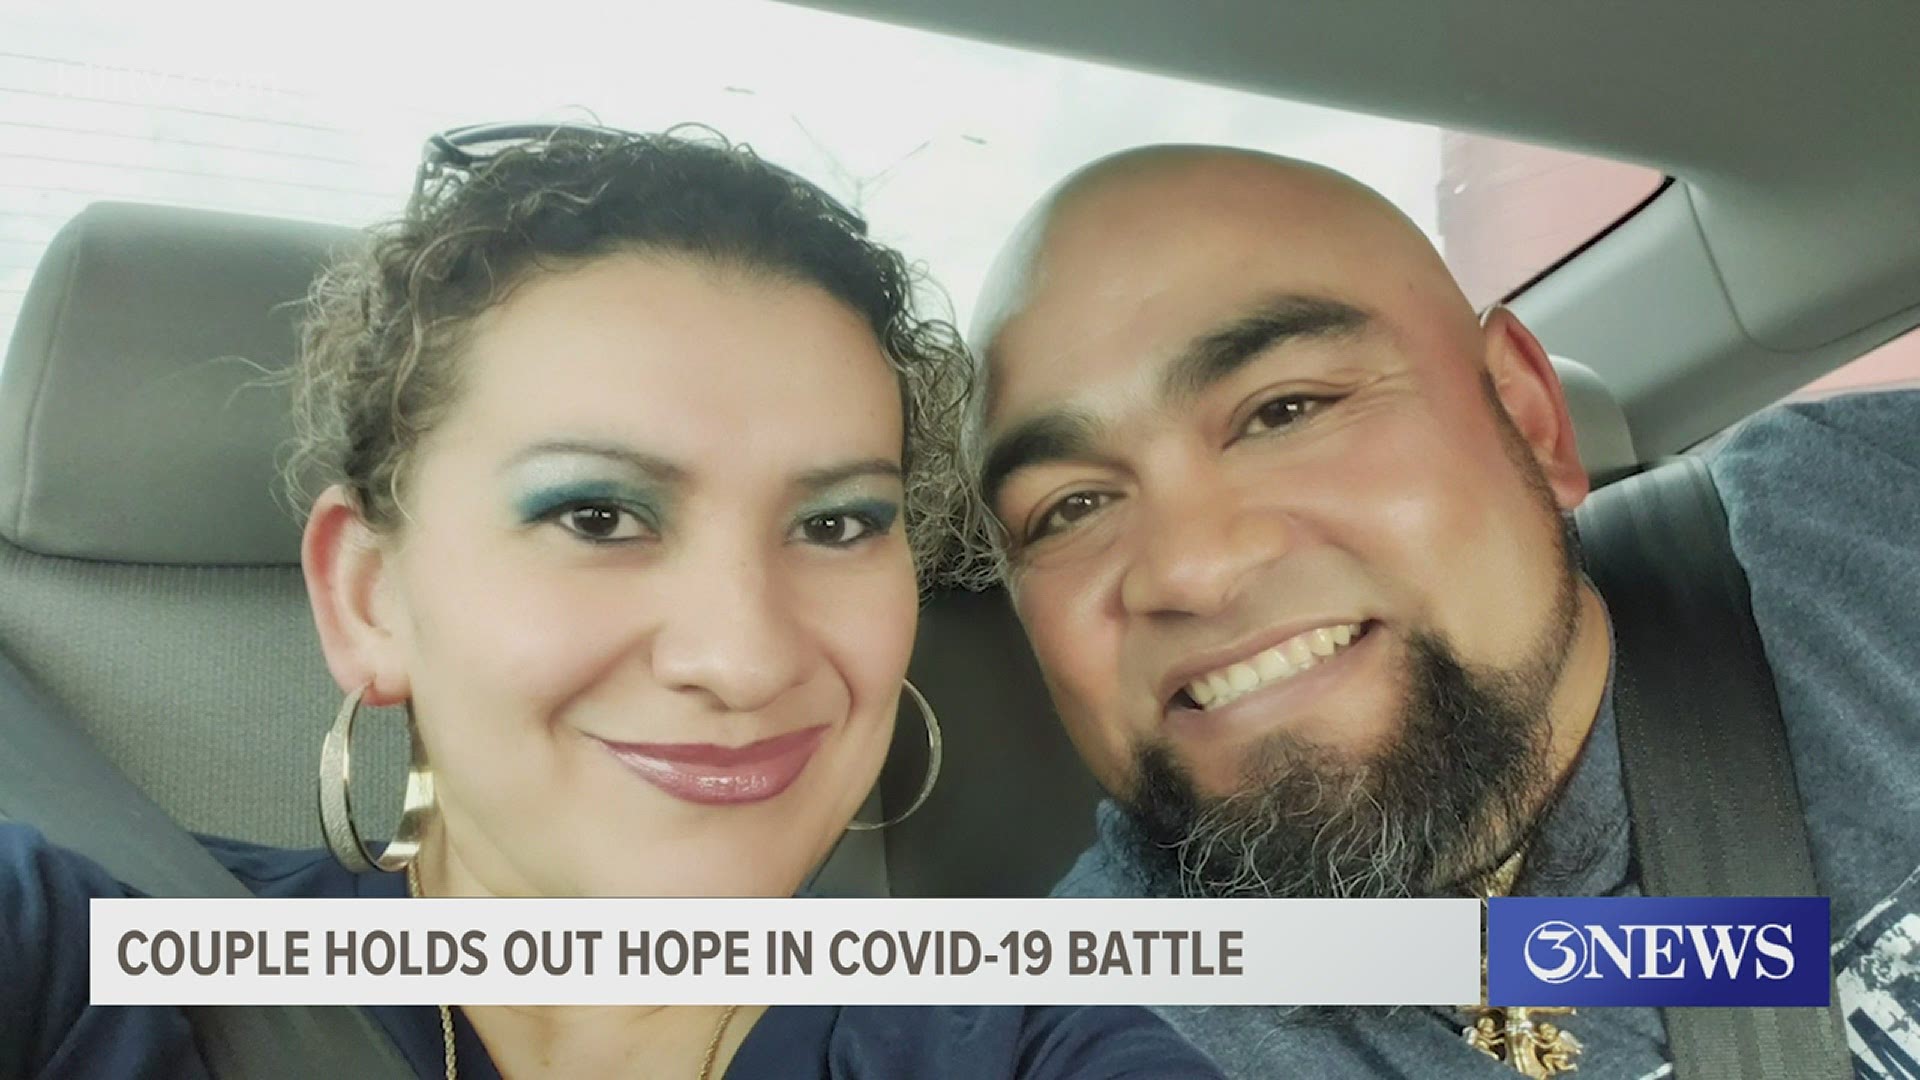 Paul and Val Moya have been together for nearly three decades. Right now, they're separated and not by choice. Paul Moya is in the ICU battling COVID-19.